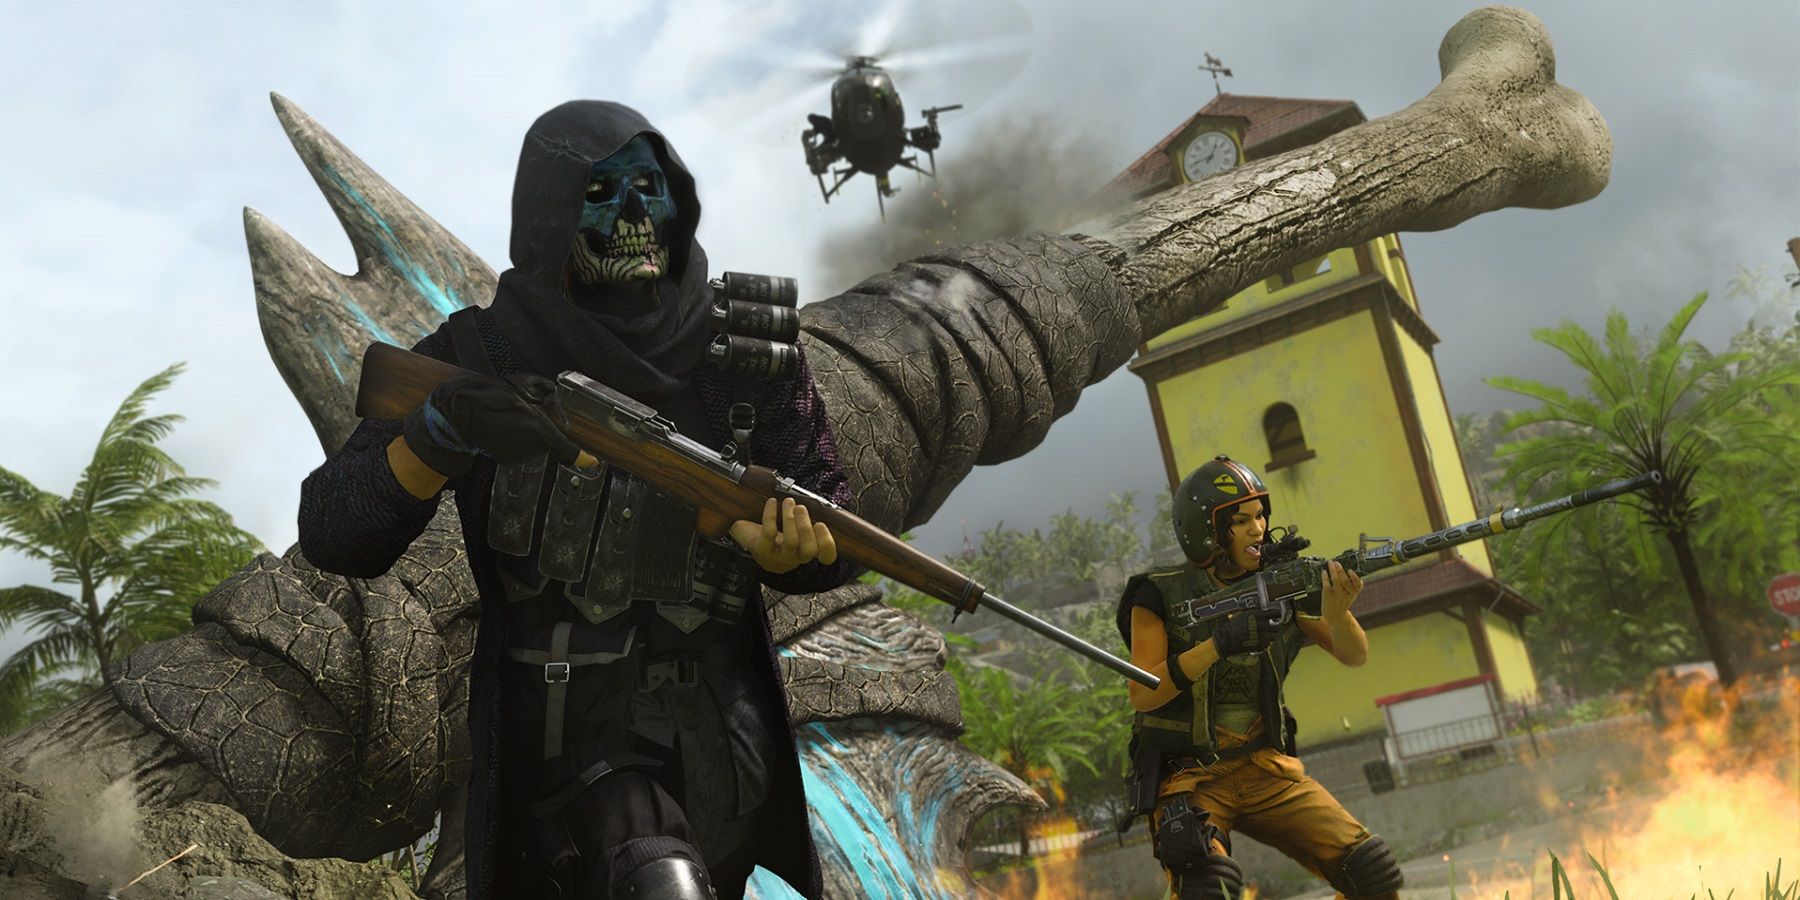 A new leak says Infinity Ward is already developing a second map for Warzone 2.